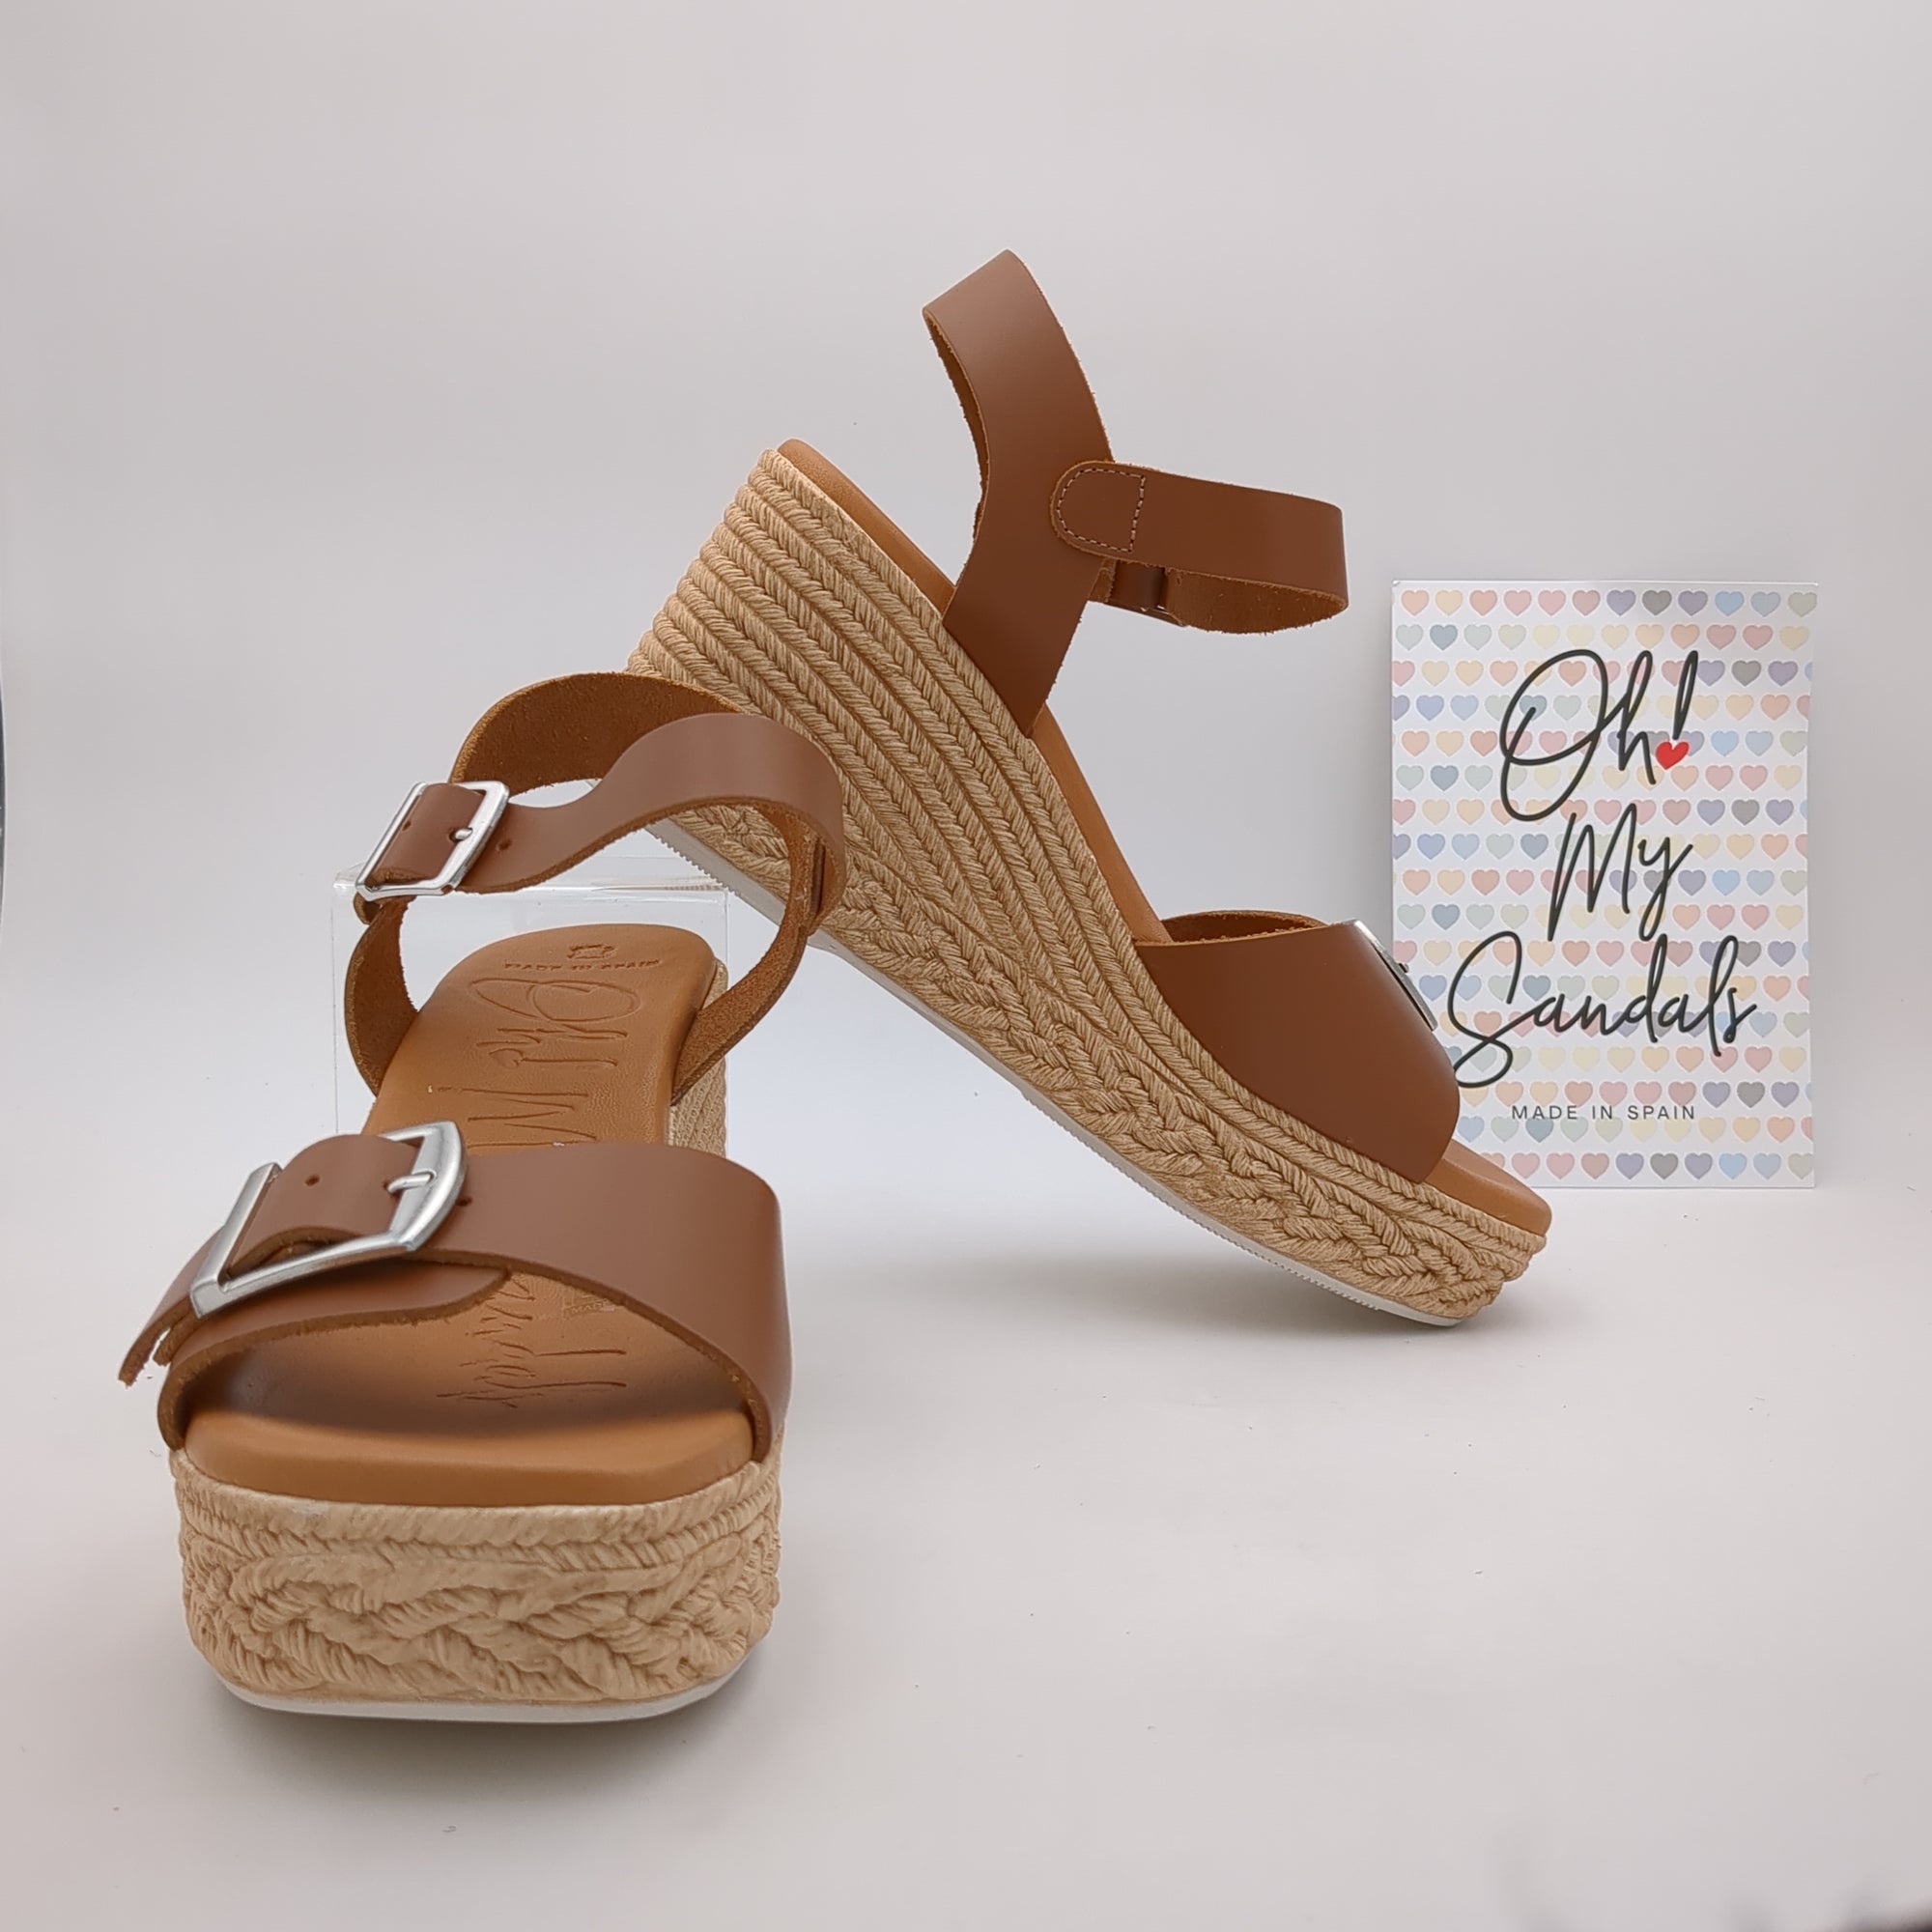 Oh My Sandals Brown Wedge Sandals with Memory Foam - 5459 ROBLE